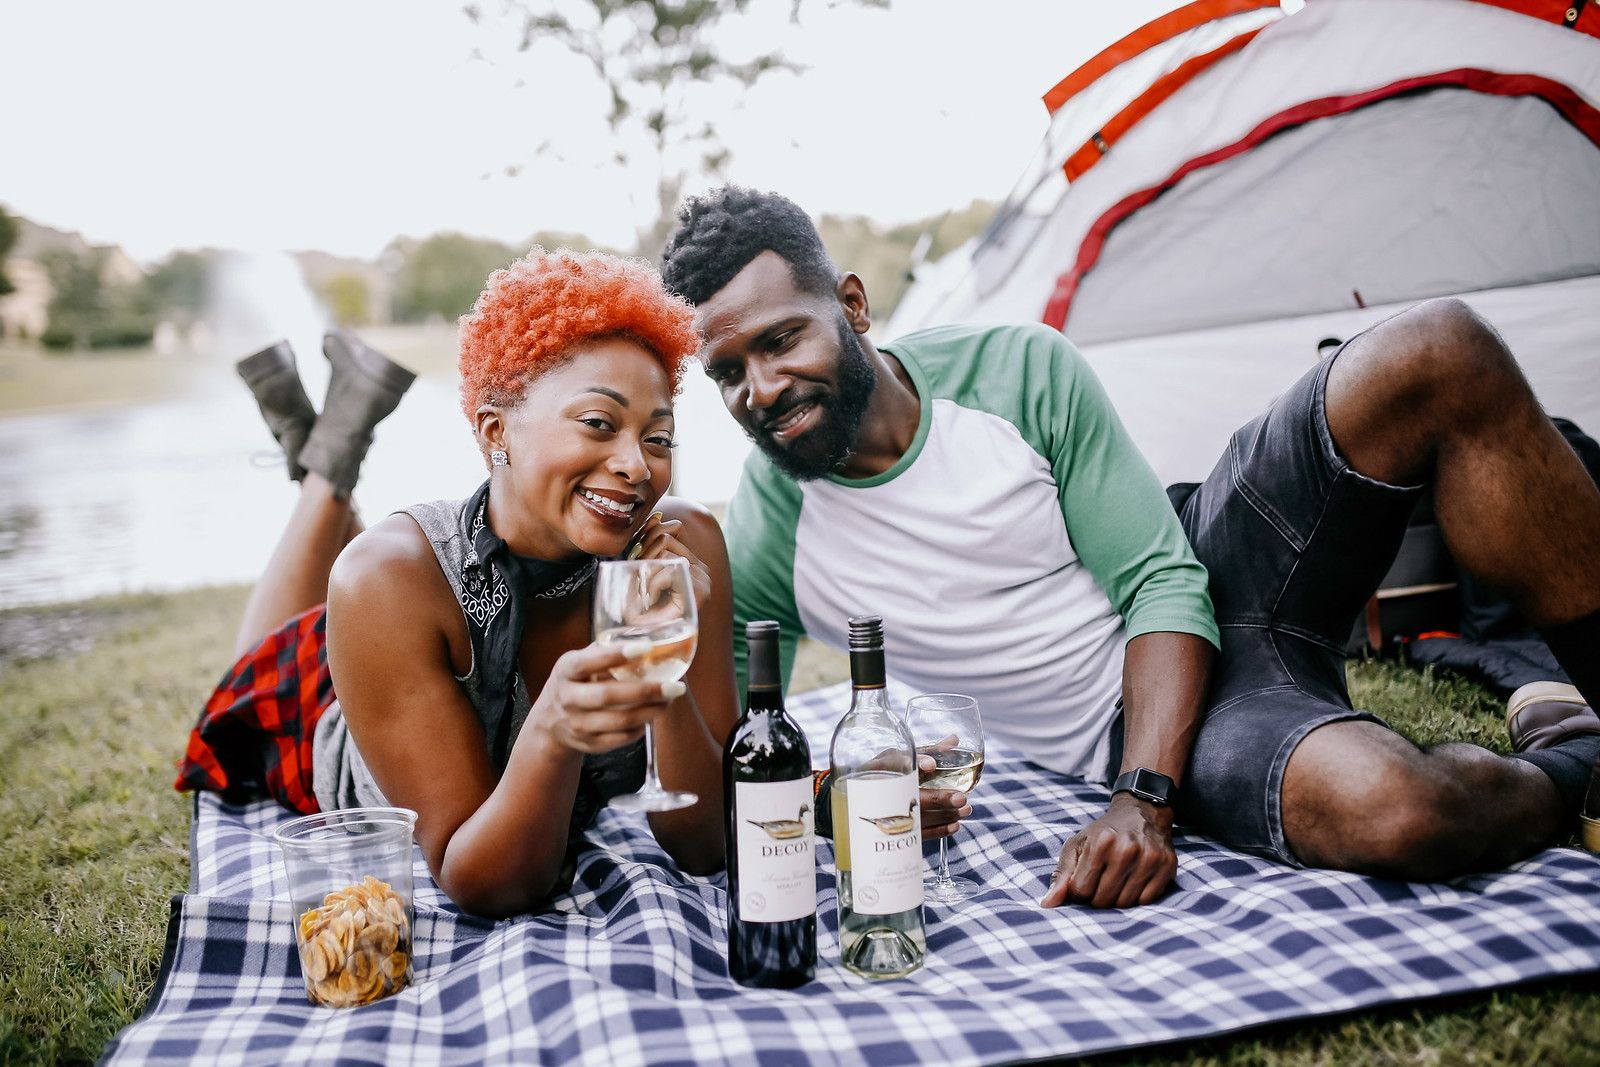 drink decoy wine while camping